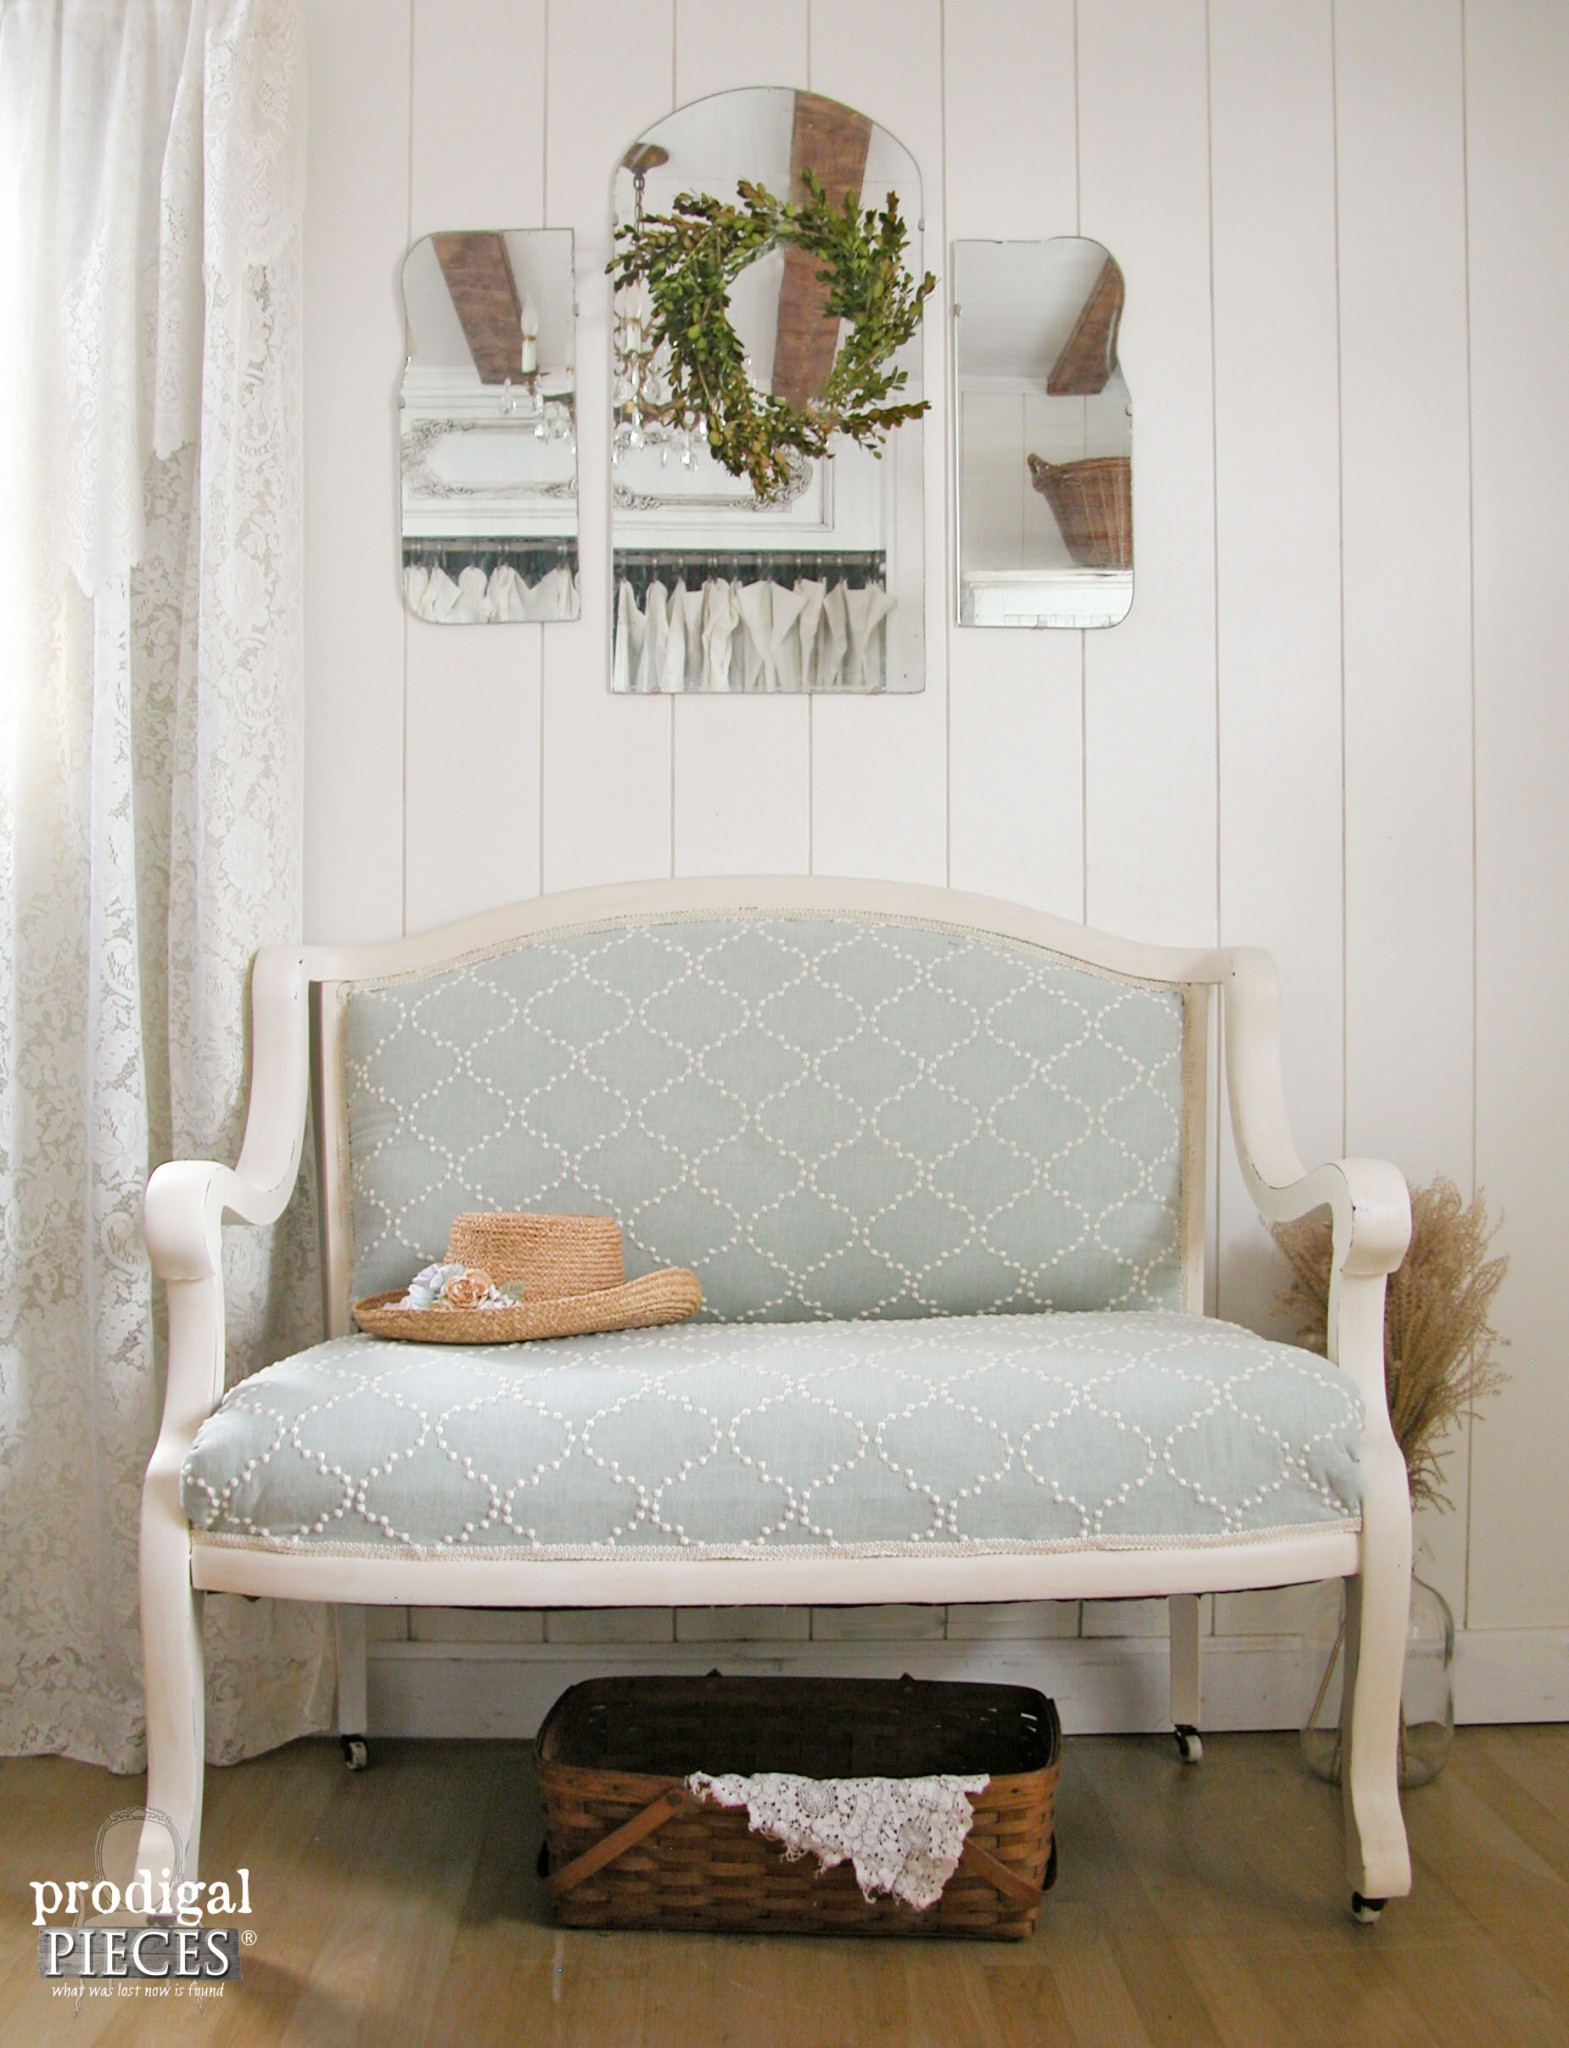 Curbside Antique Settee Makeover | Prodigal Pieces | www.prodigalpieces.com 